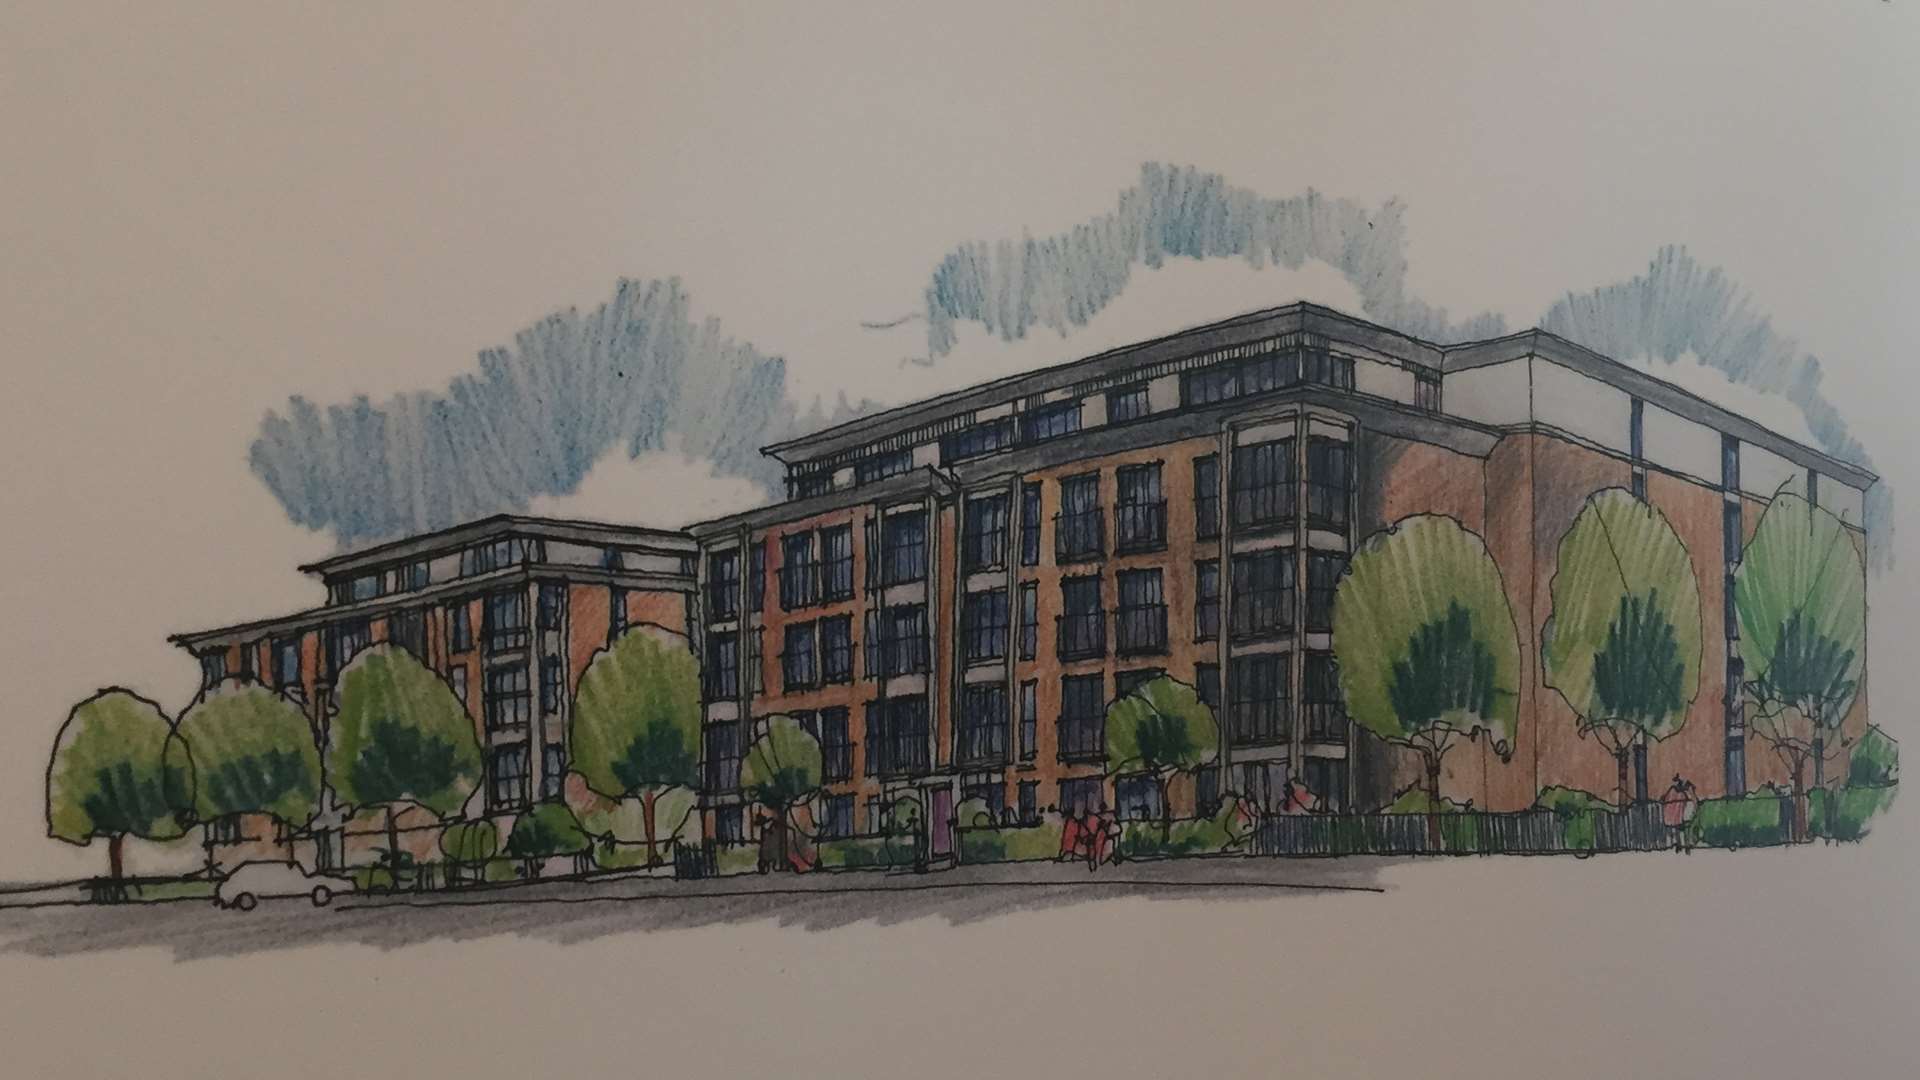 New artist impressions show what the proposed assisted living homes would look like